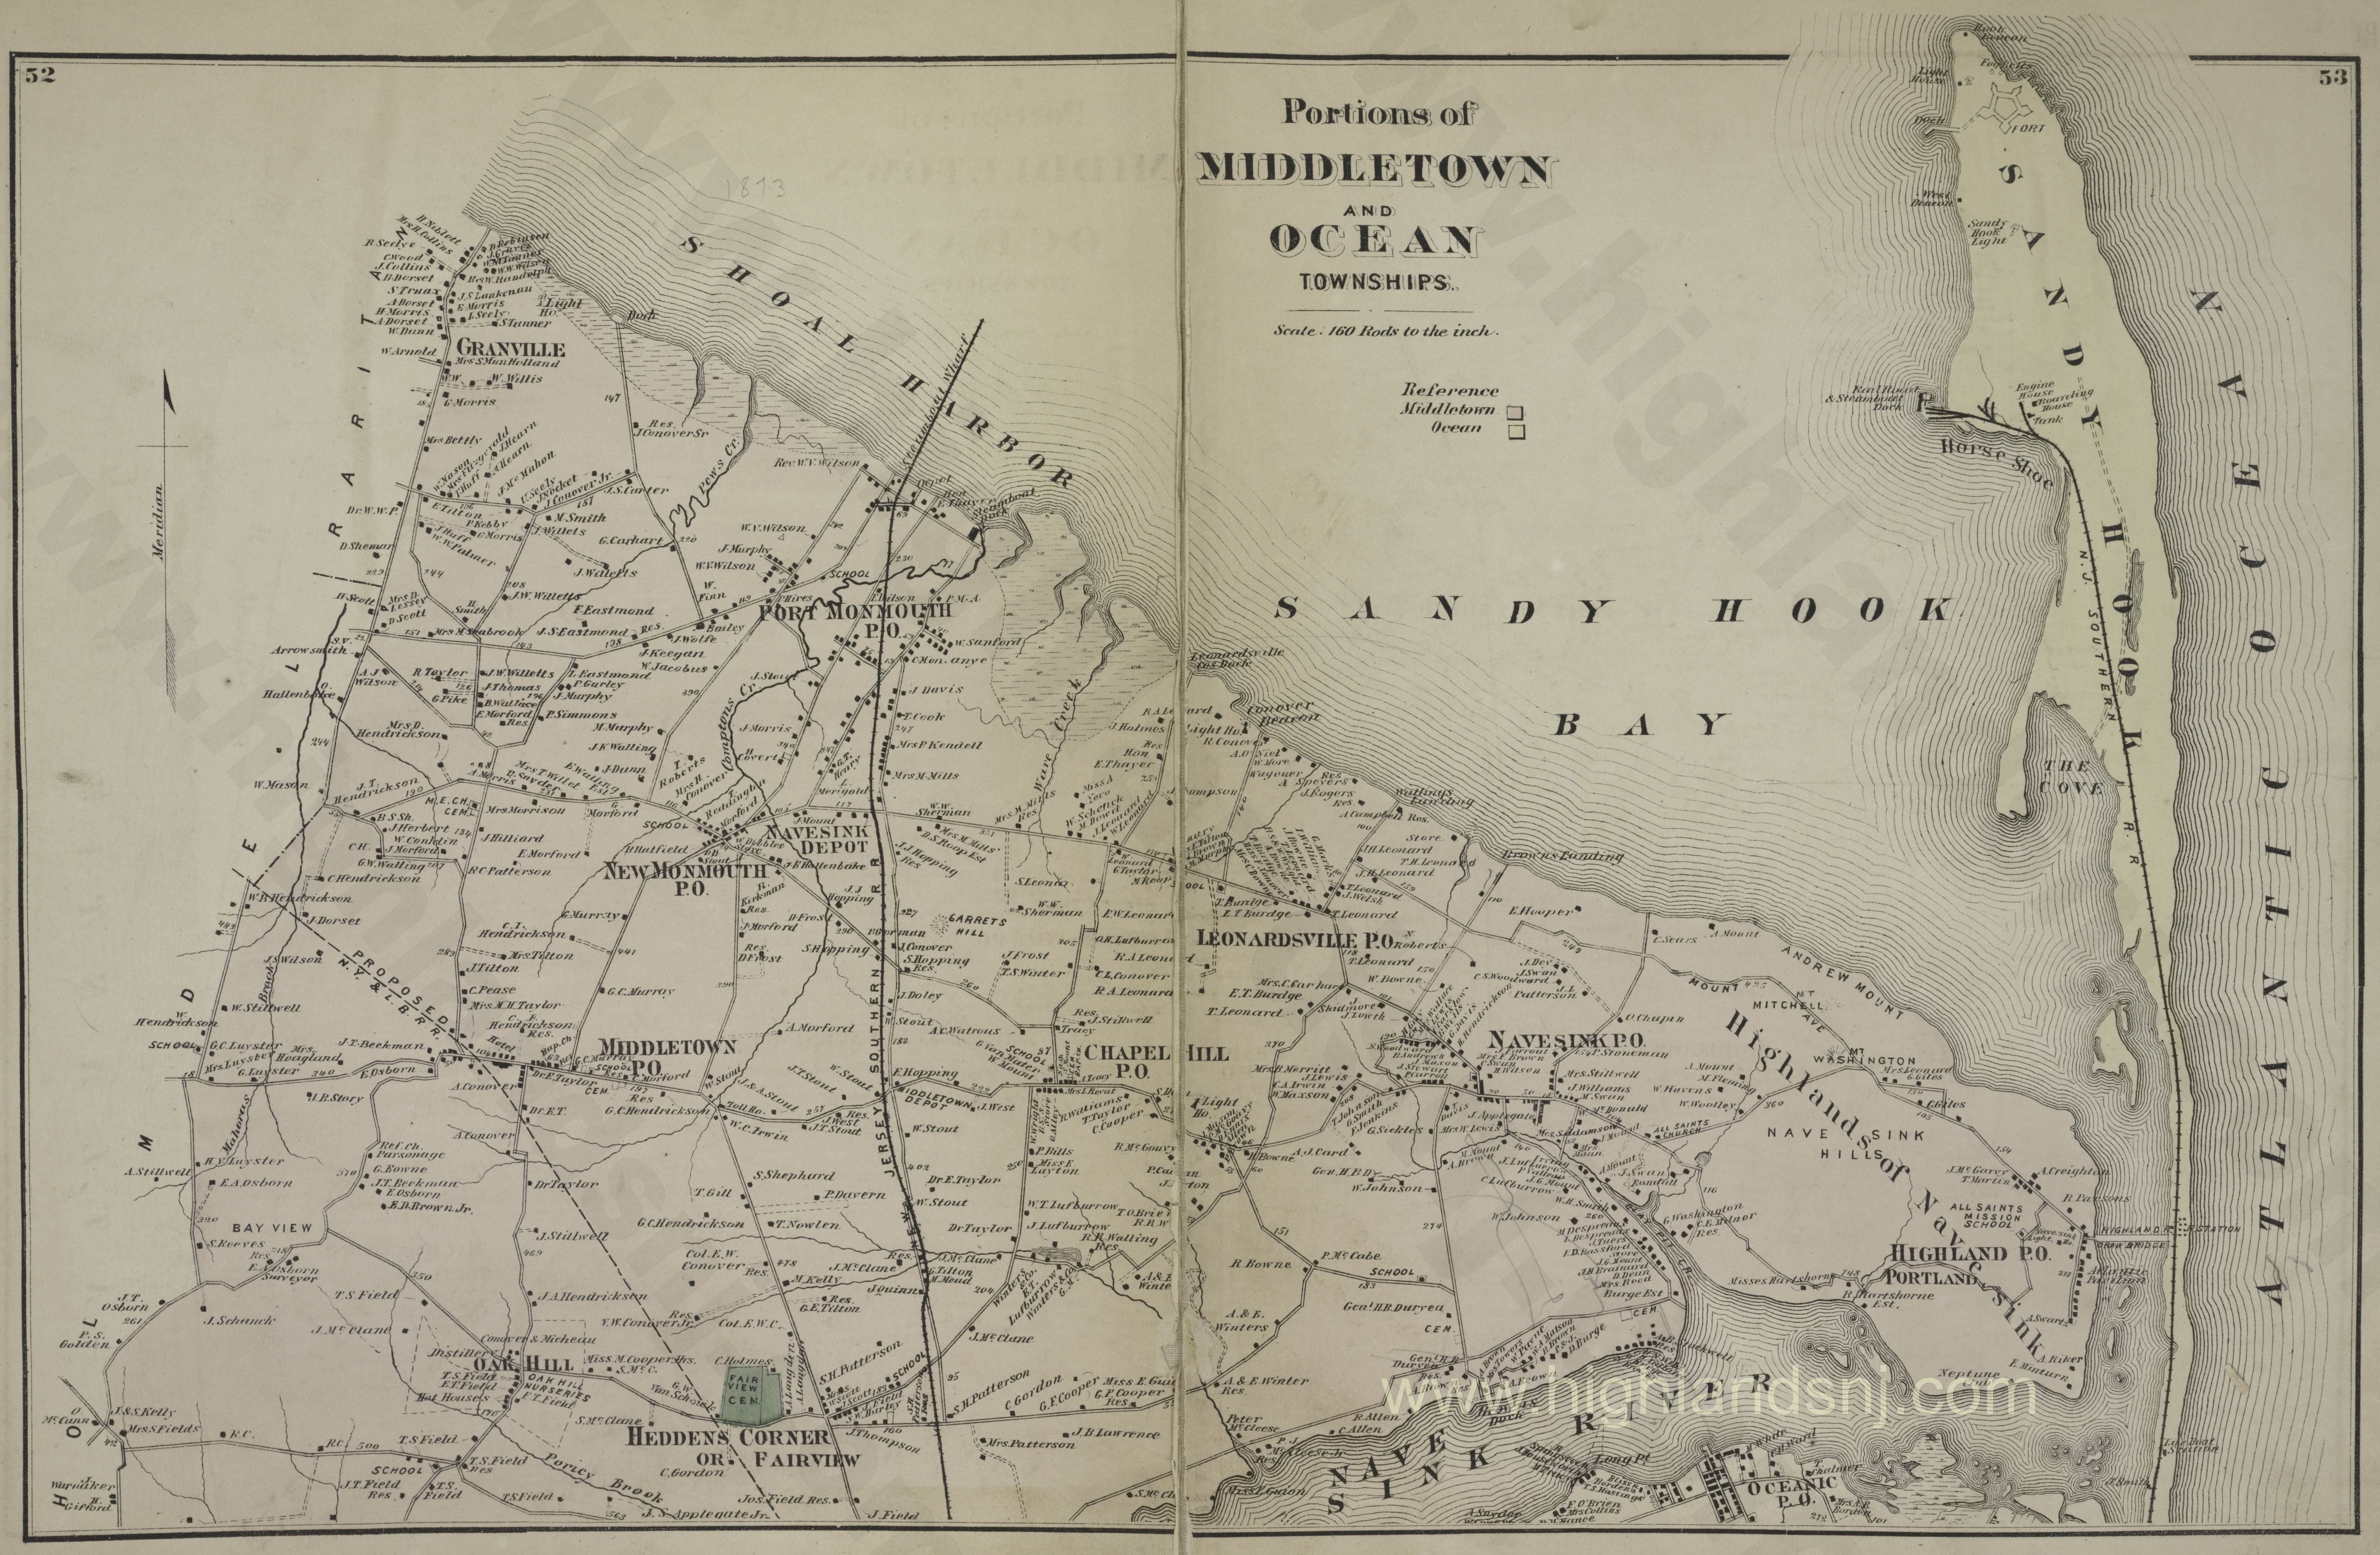 1873 Map of Portions of Middletown and Ocean Townships